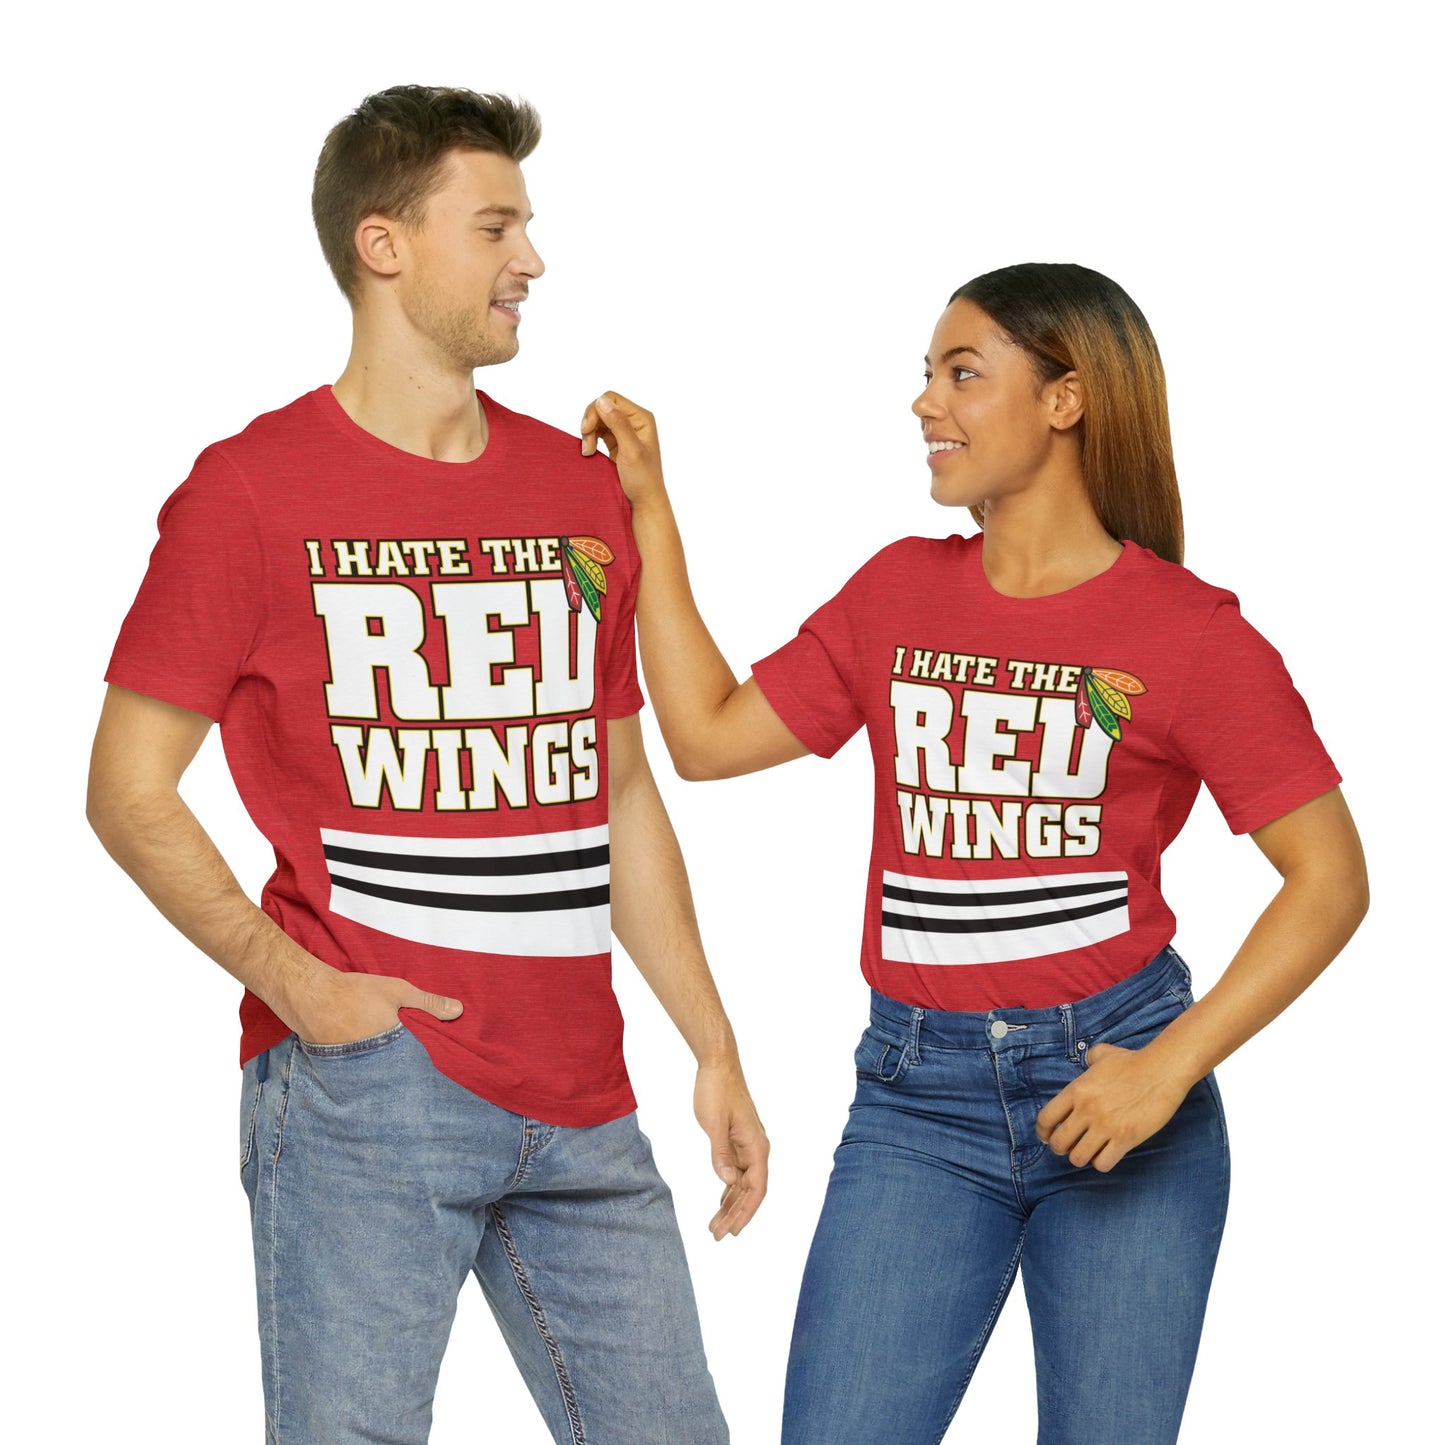 I Hate That Motor City Red Winged Team (Chicago Fan) - Unisex Jersey Short Sleeve Tee